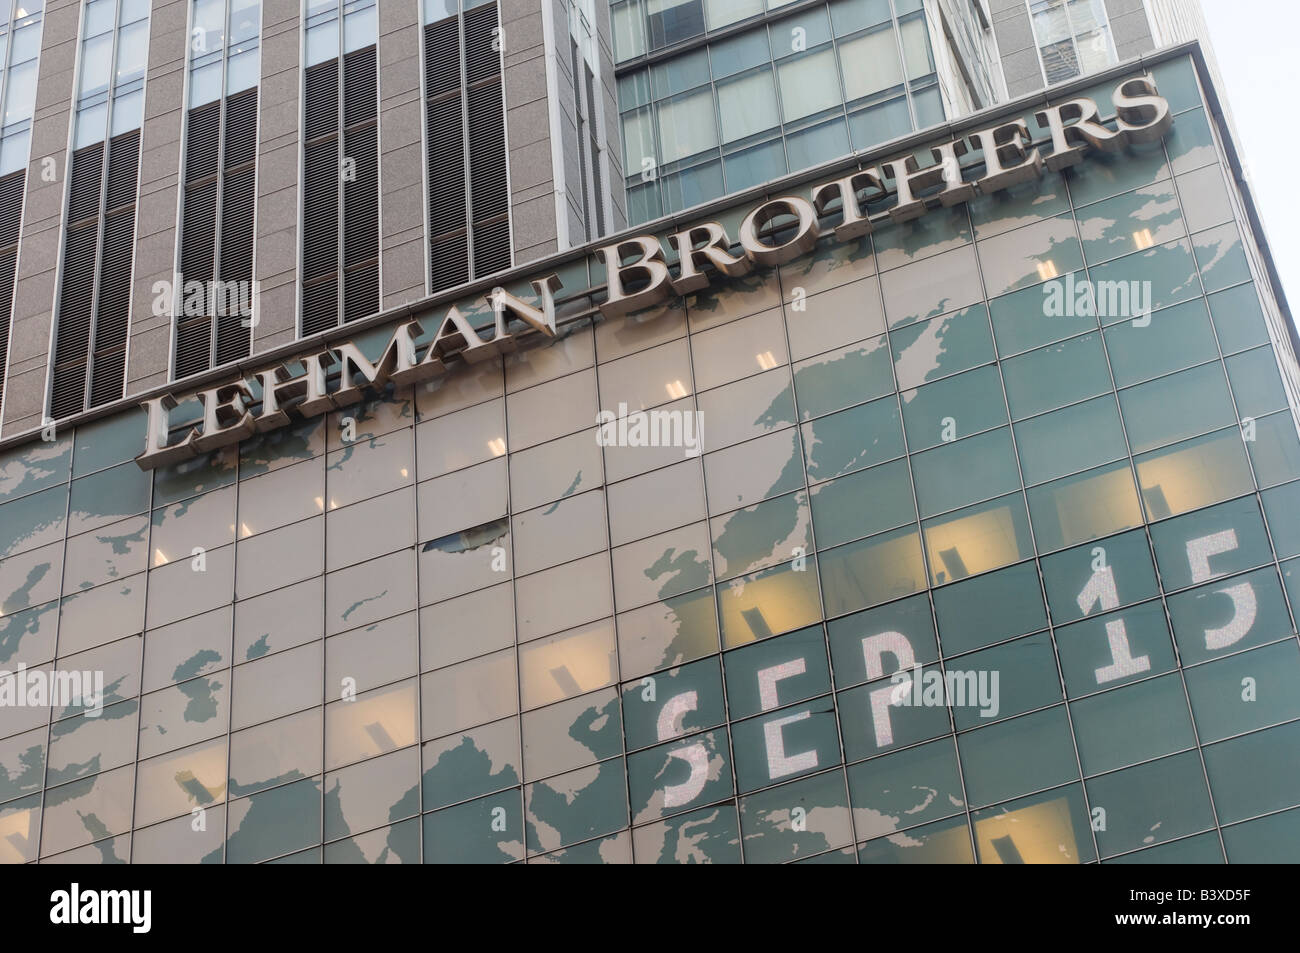 New York NY 15 September 2008 Lehman Brothers files for bankruptcy ©Stacy Walsh Rosenstock/Alamy Stock Photo